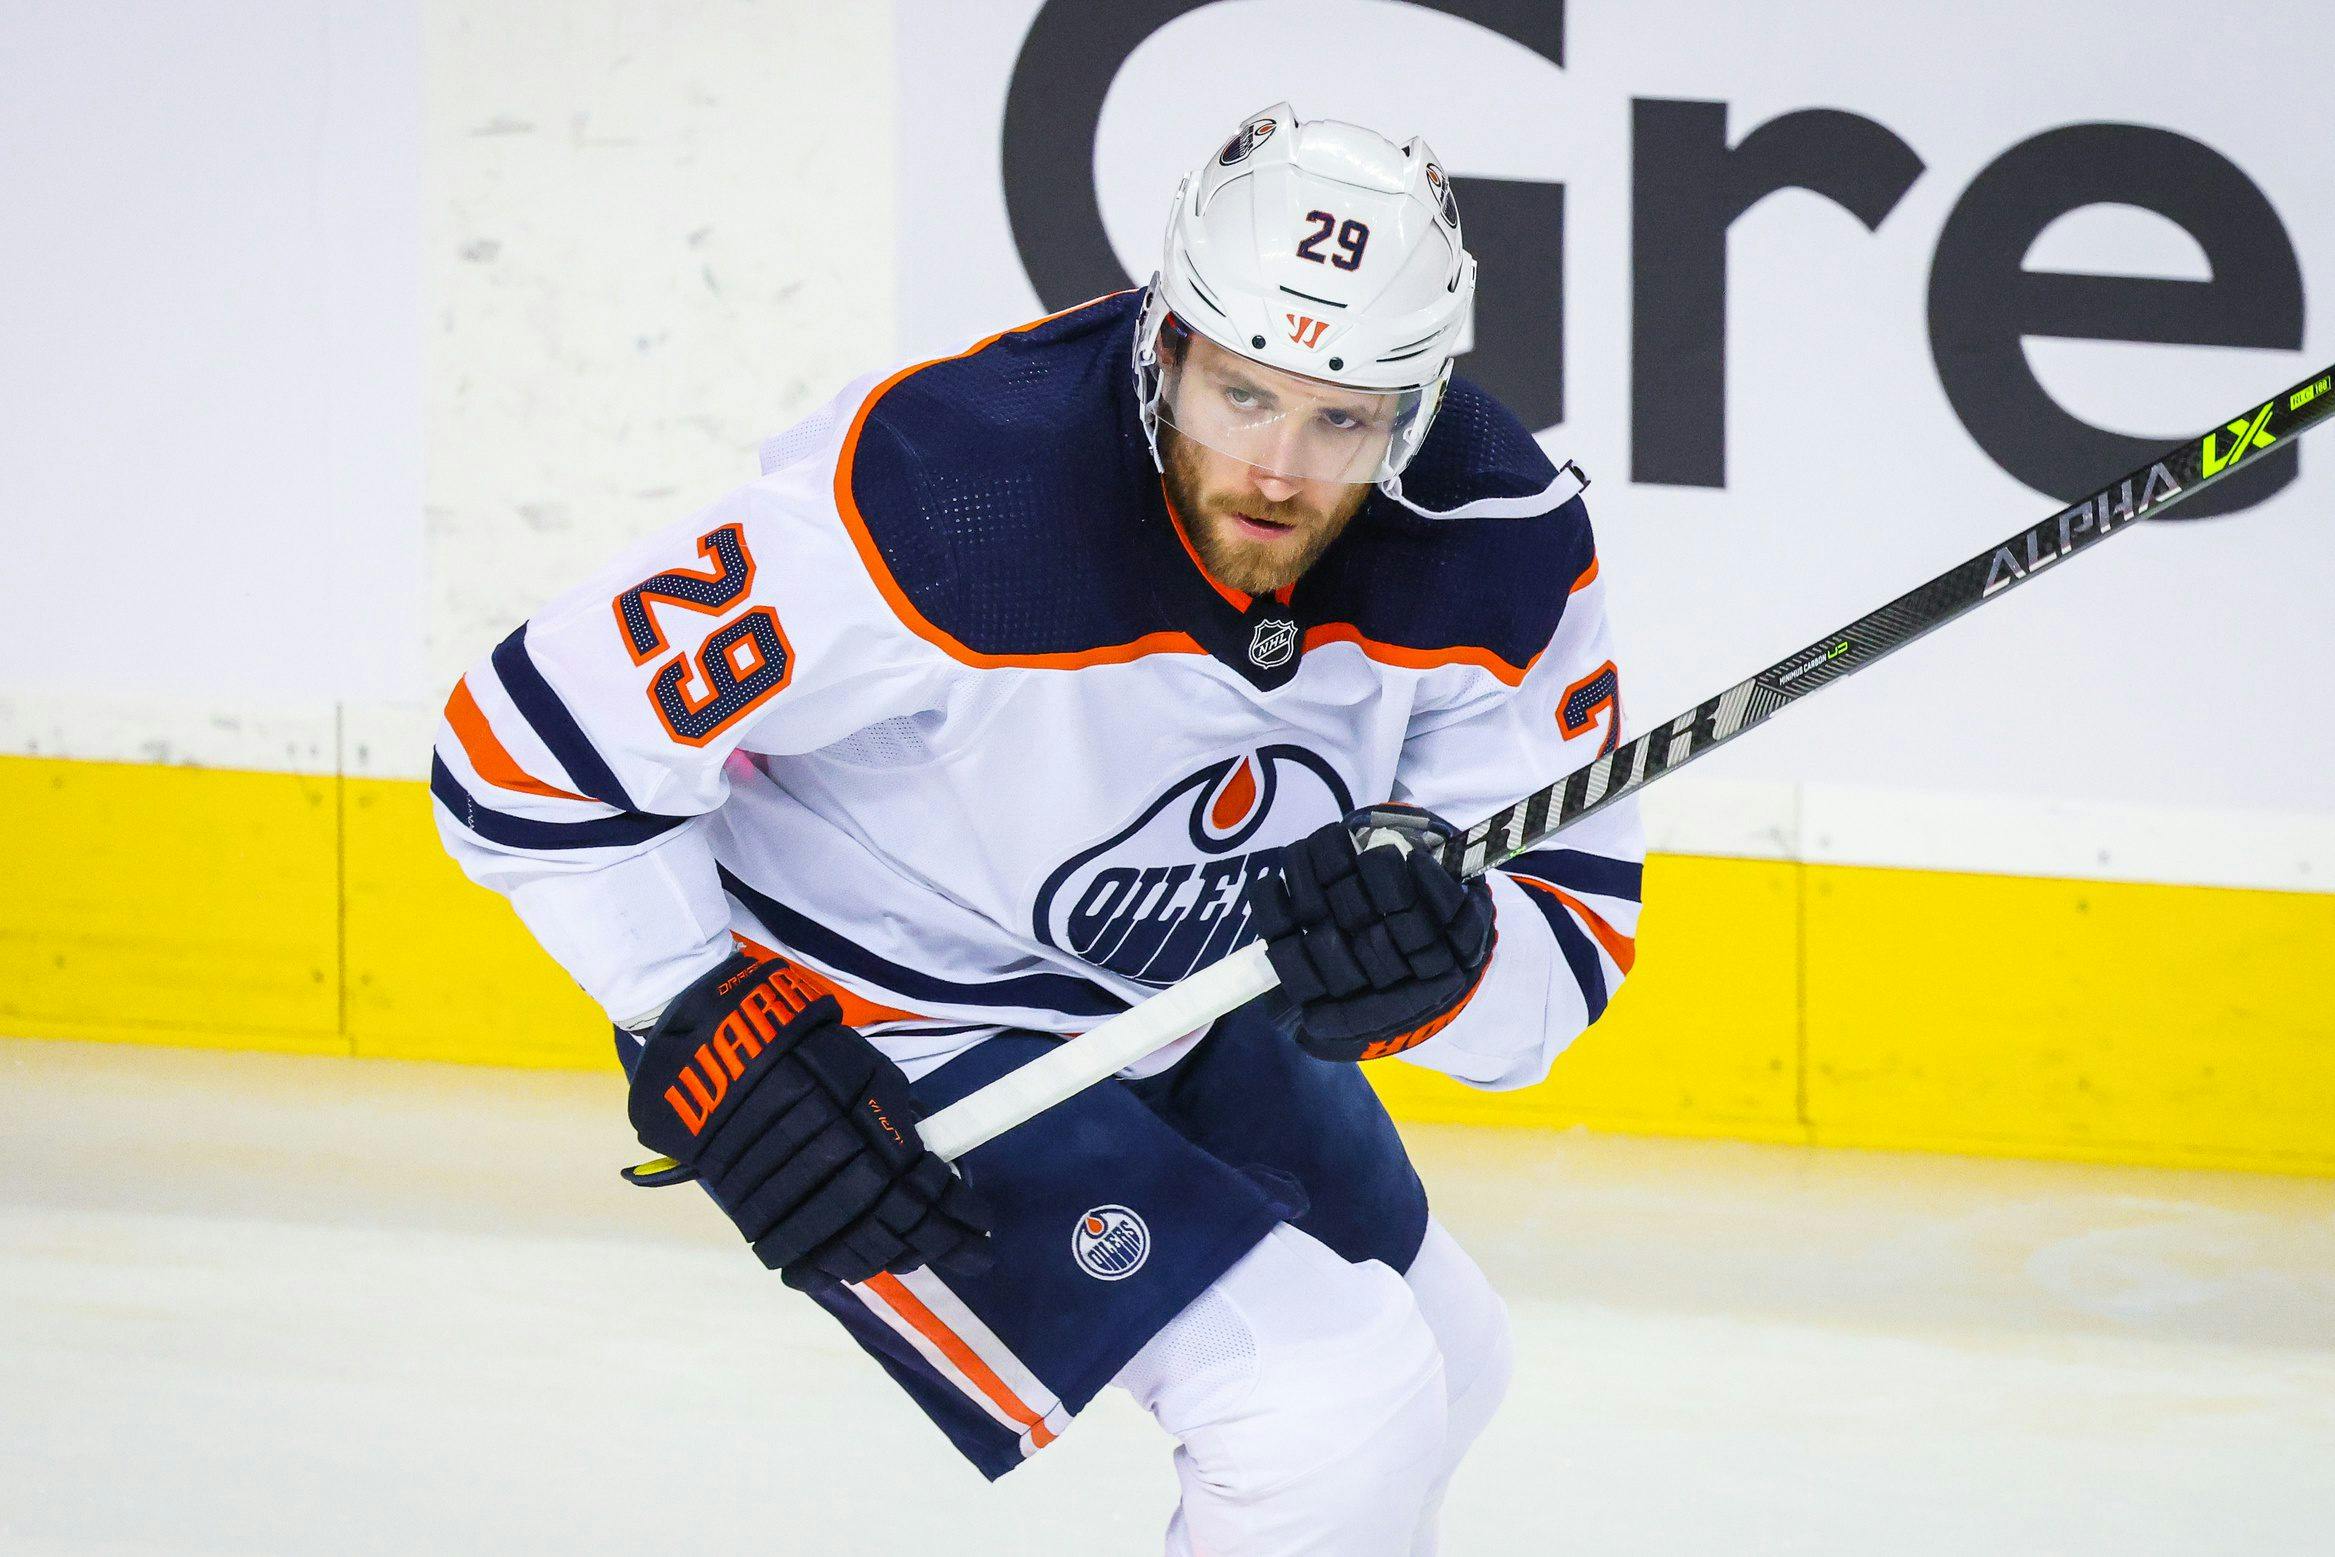 Daily Faceoff Live: Is Leon Draisaitl underrated?